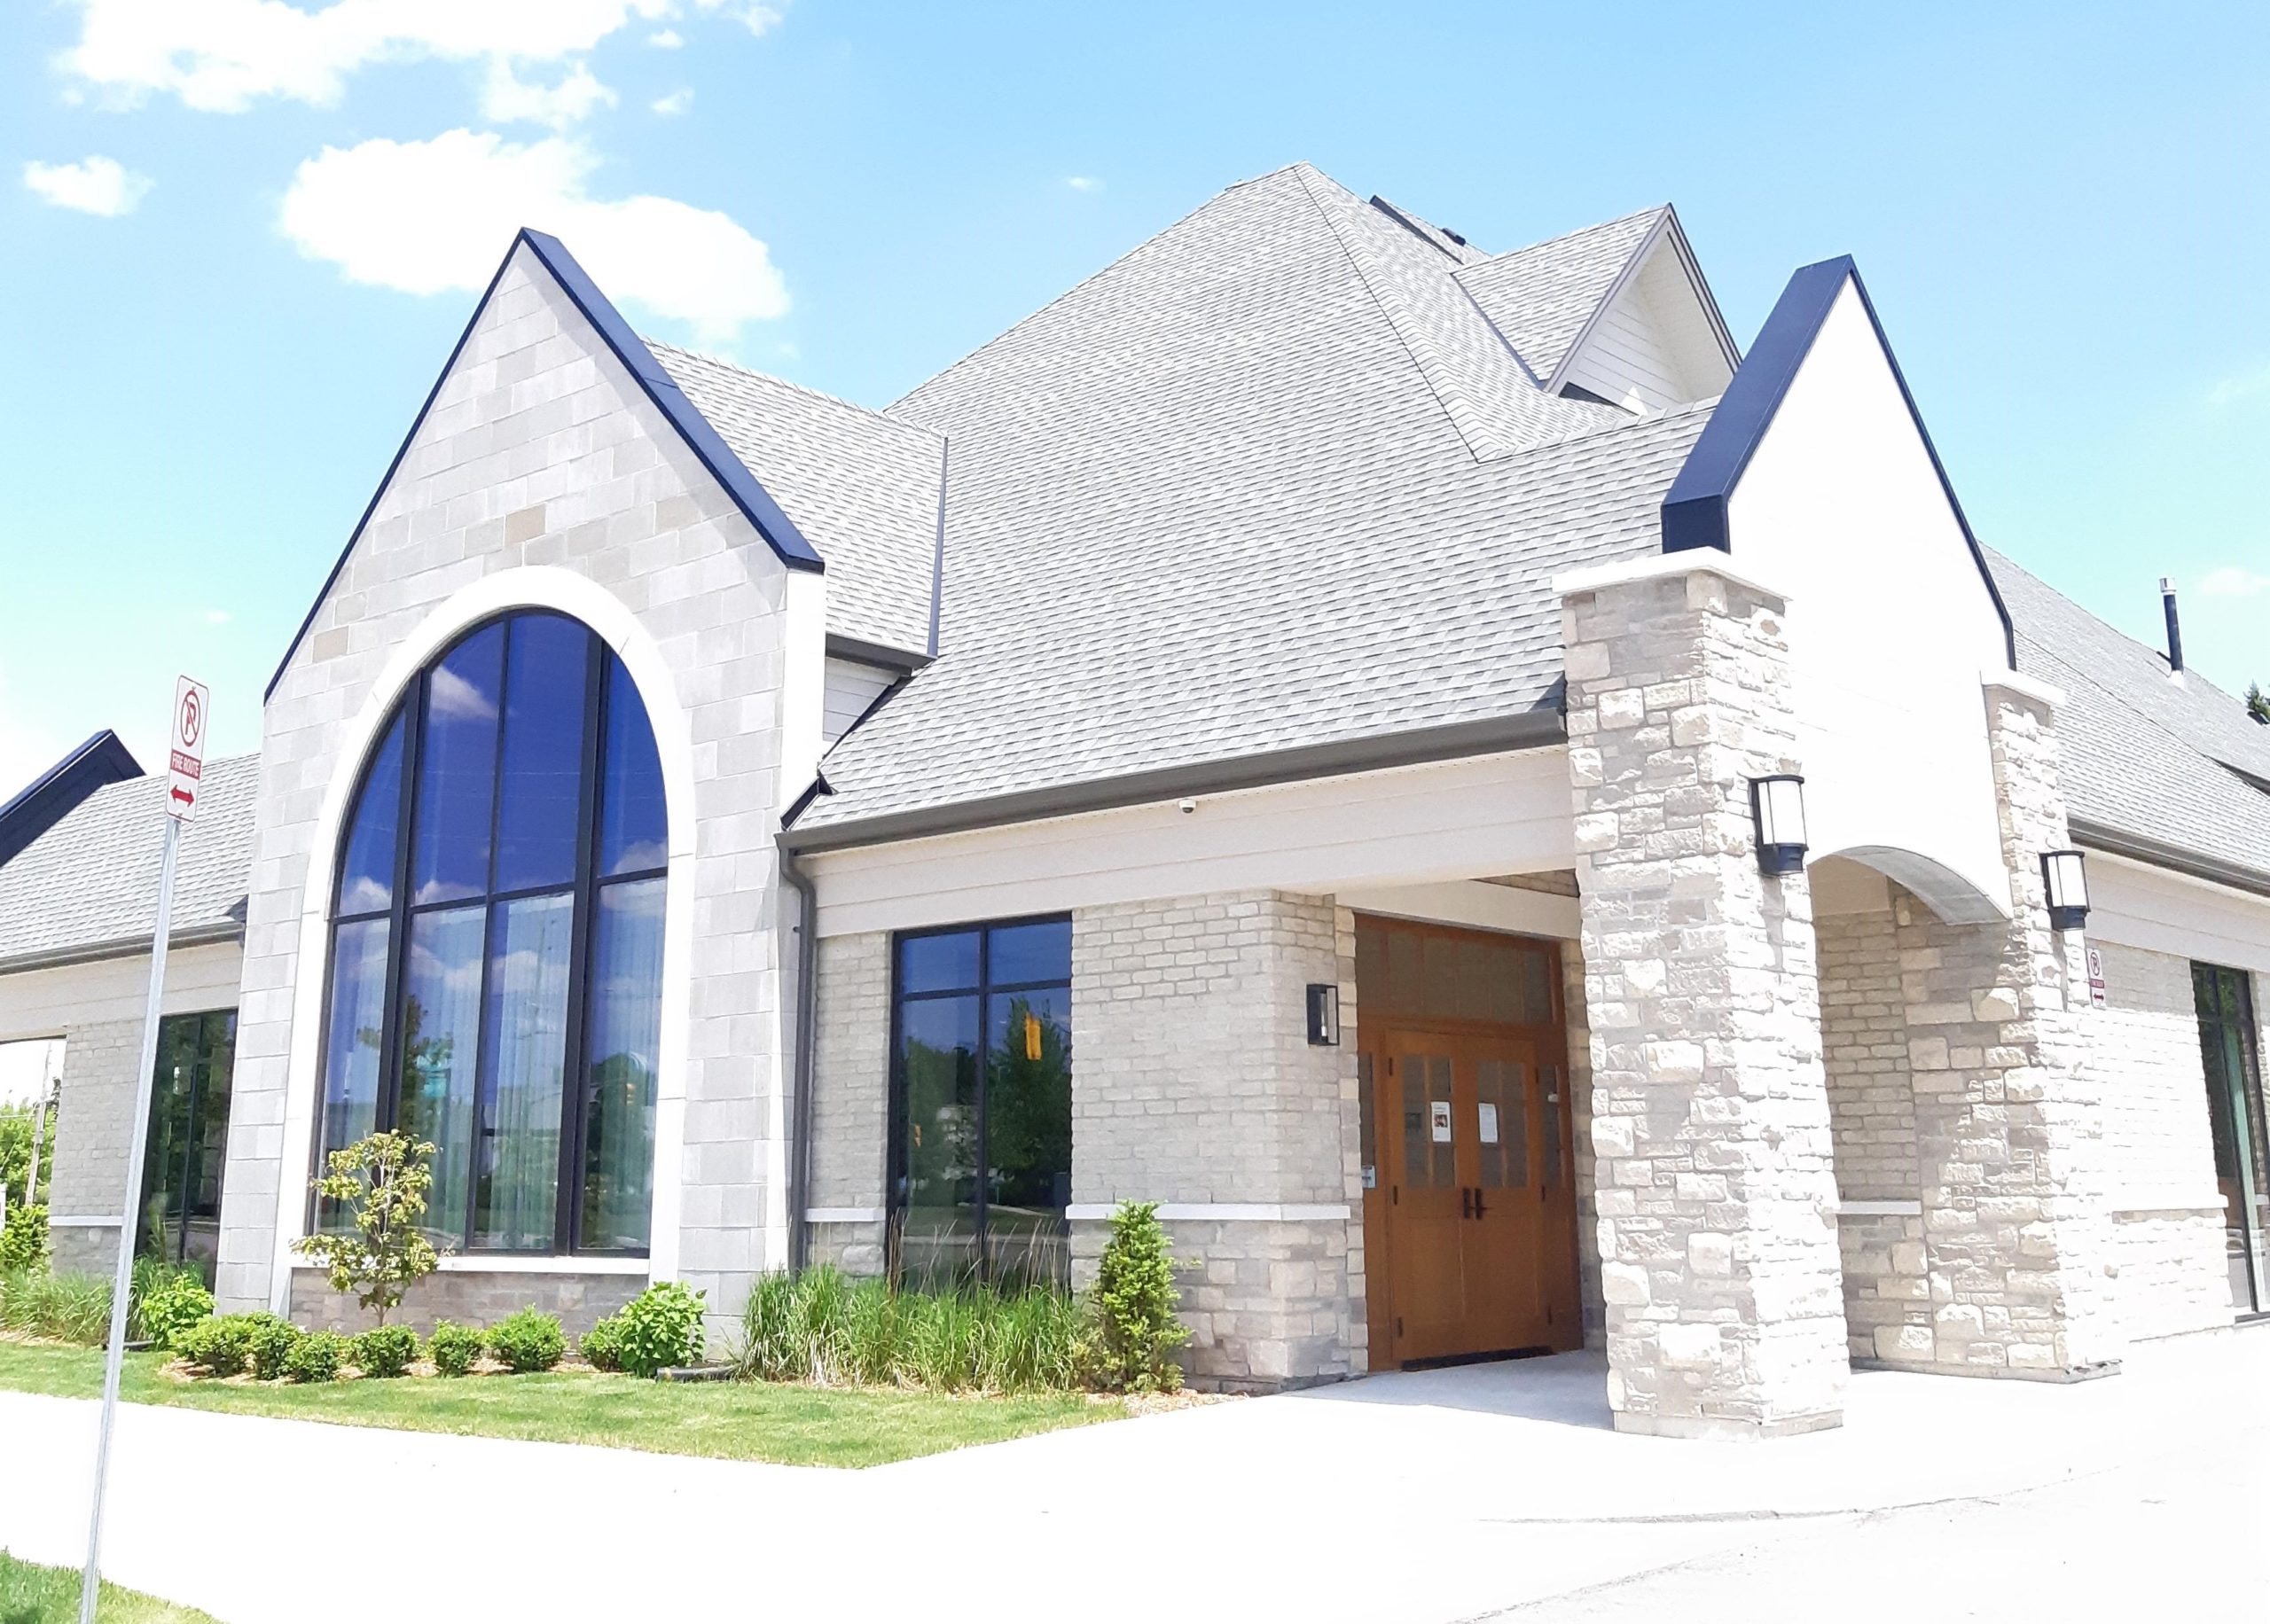 Exterior of a funeral home, with large glass windows and large wooden entrance doors.